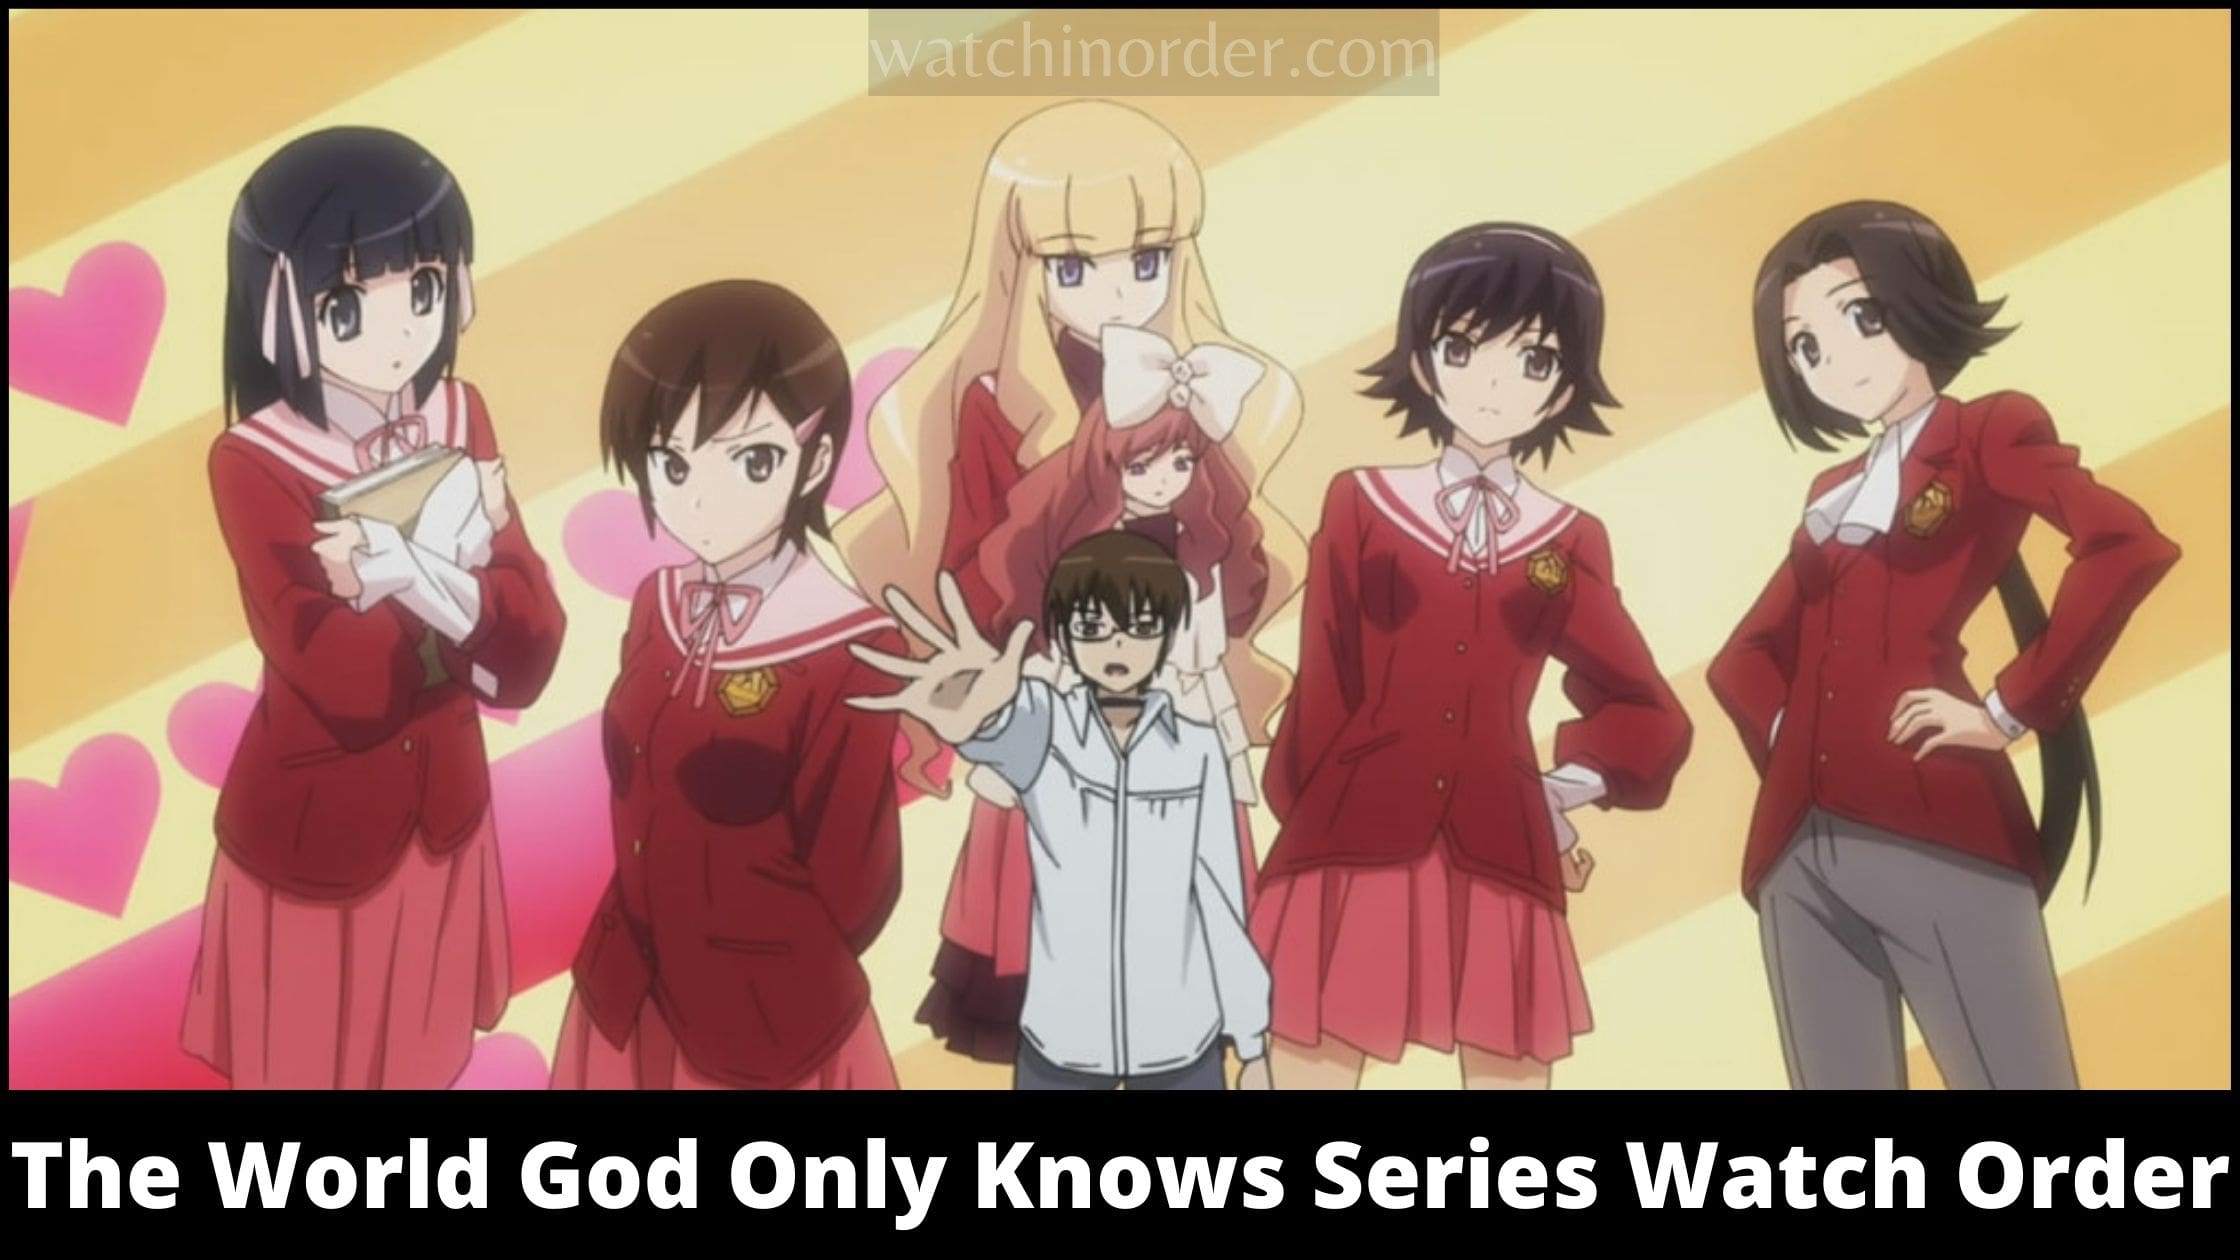 The World God Only Knows Series Watch Order